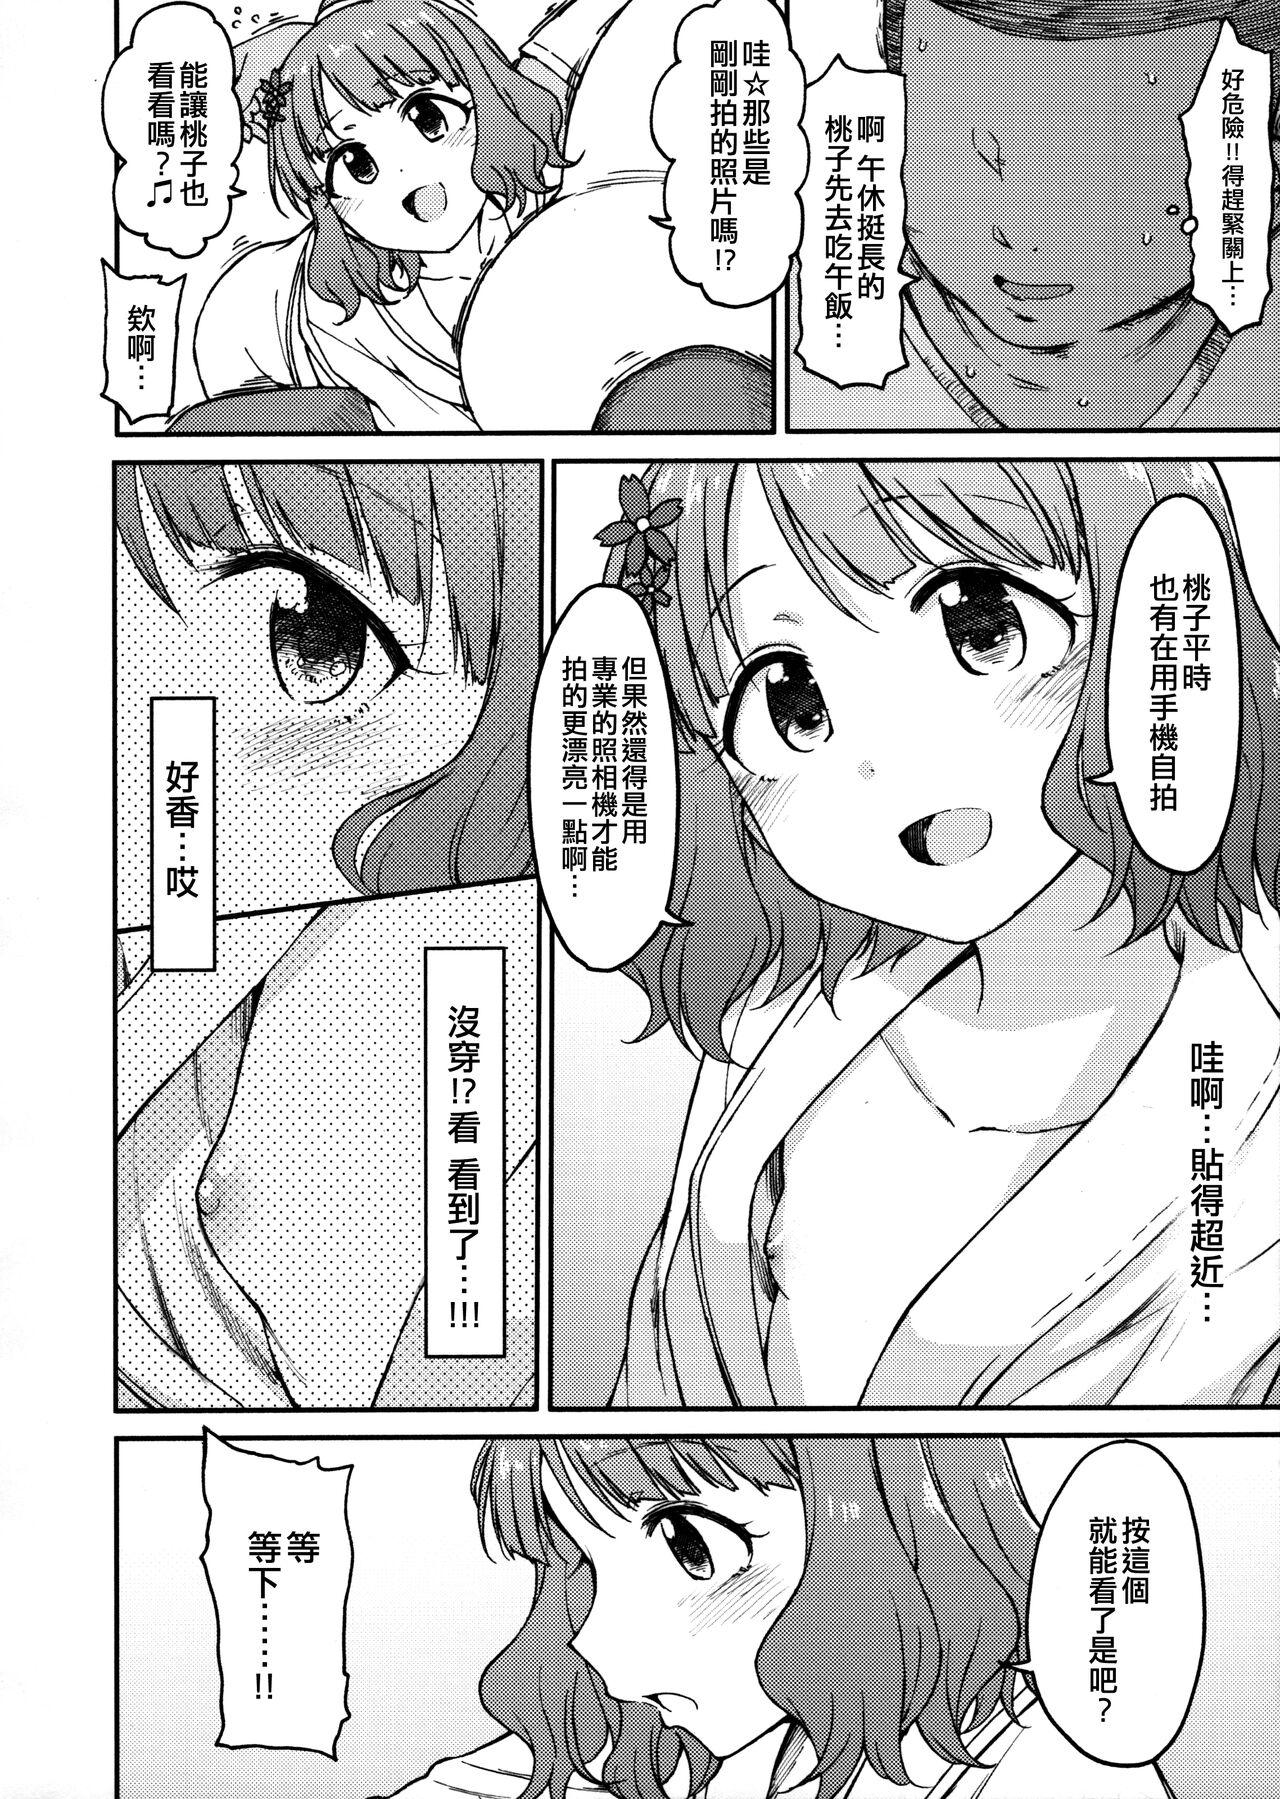 Fetish Candy Wrapper - The idolmaster Public Nudity - Page 11